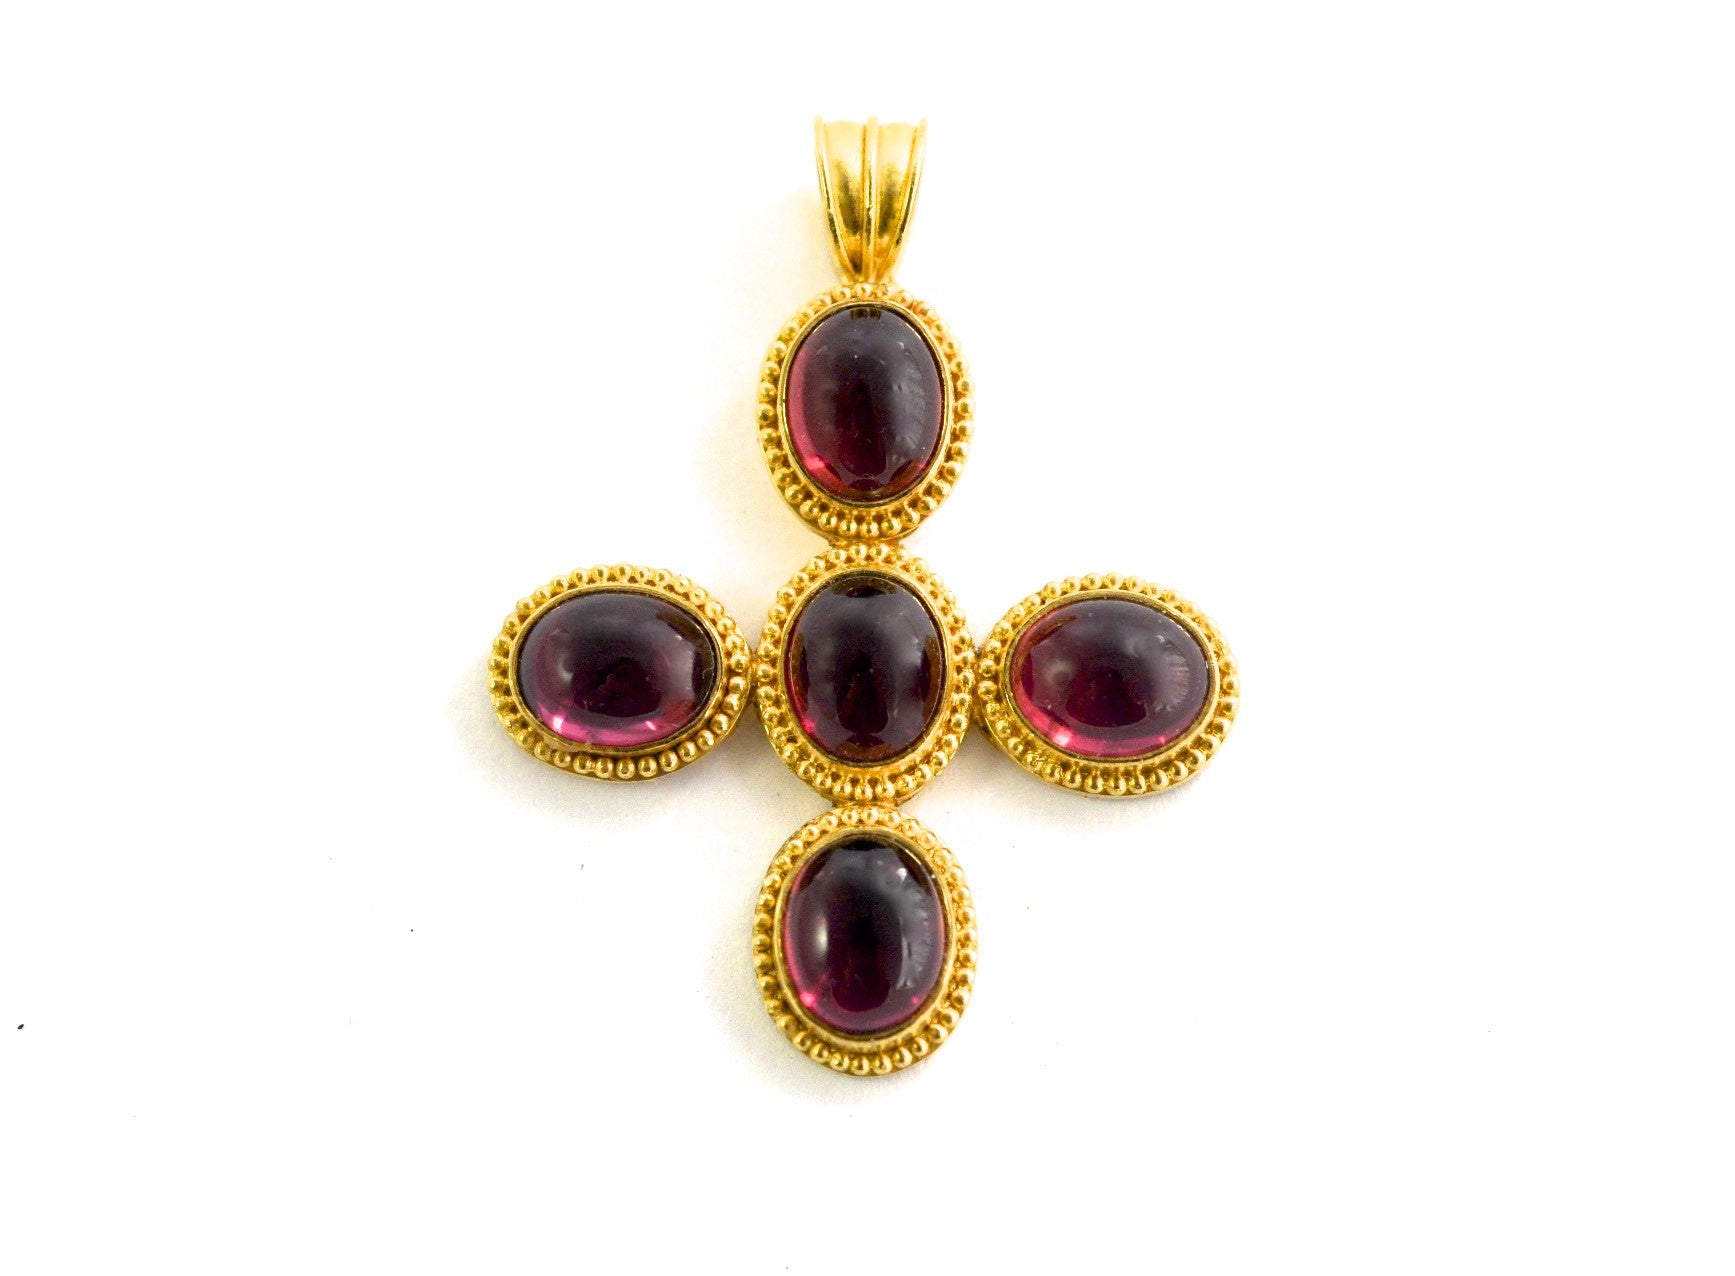 necklace  / gold 22k hand woven chain + Rhodolite cabochons pendant